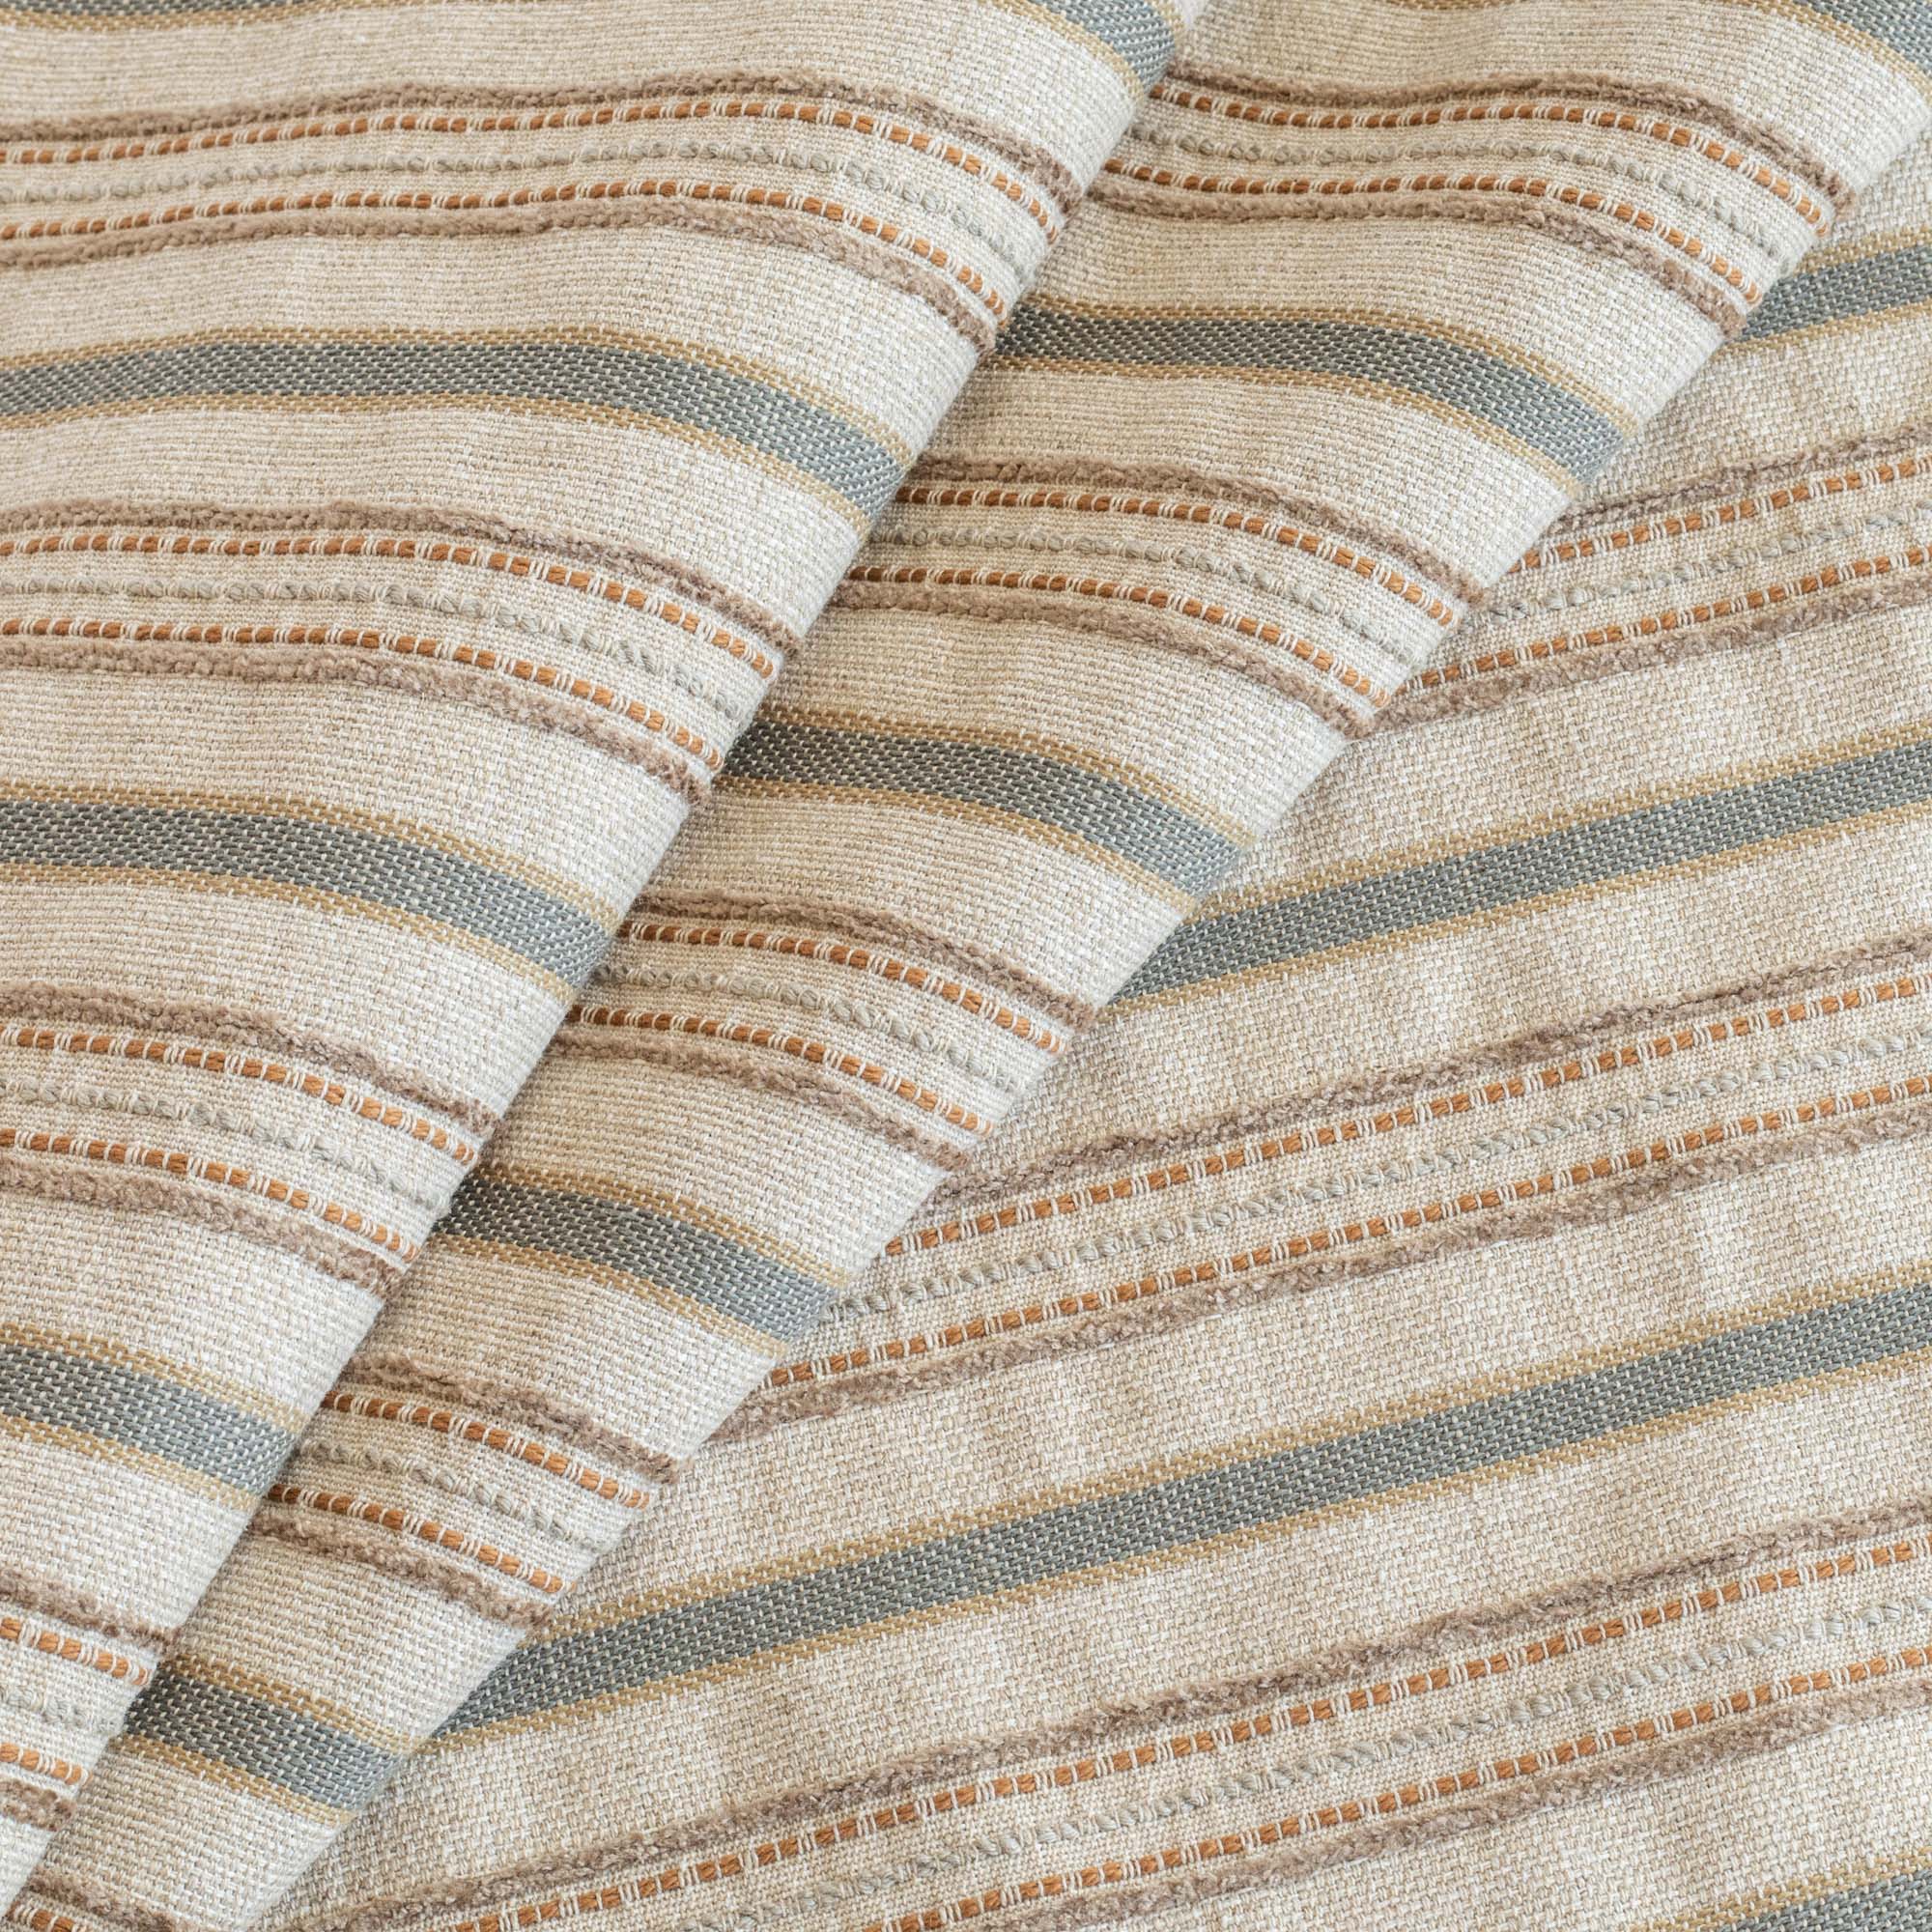 a beige, brown and grey earth toned striped designer home decor fabric 